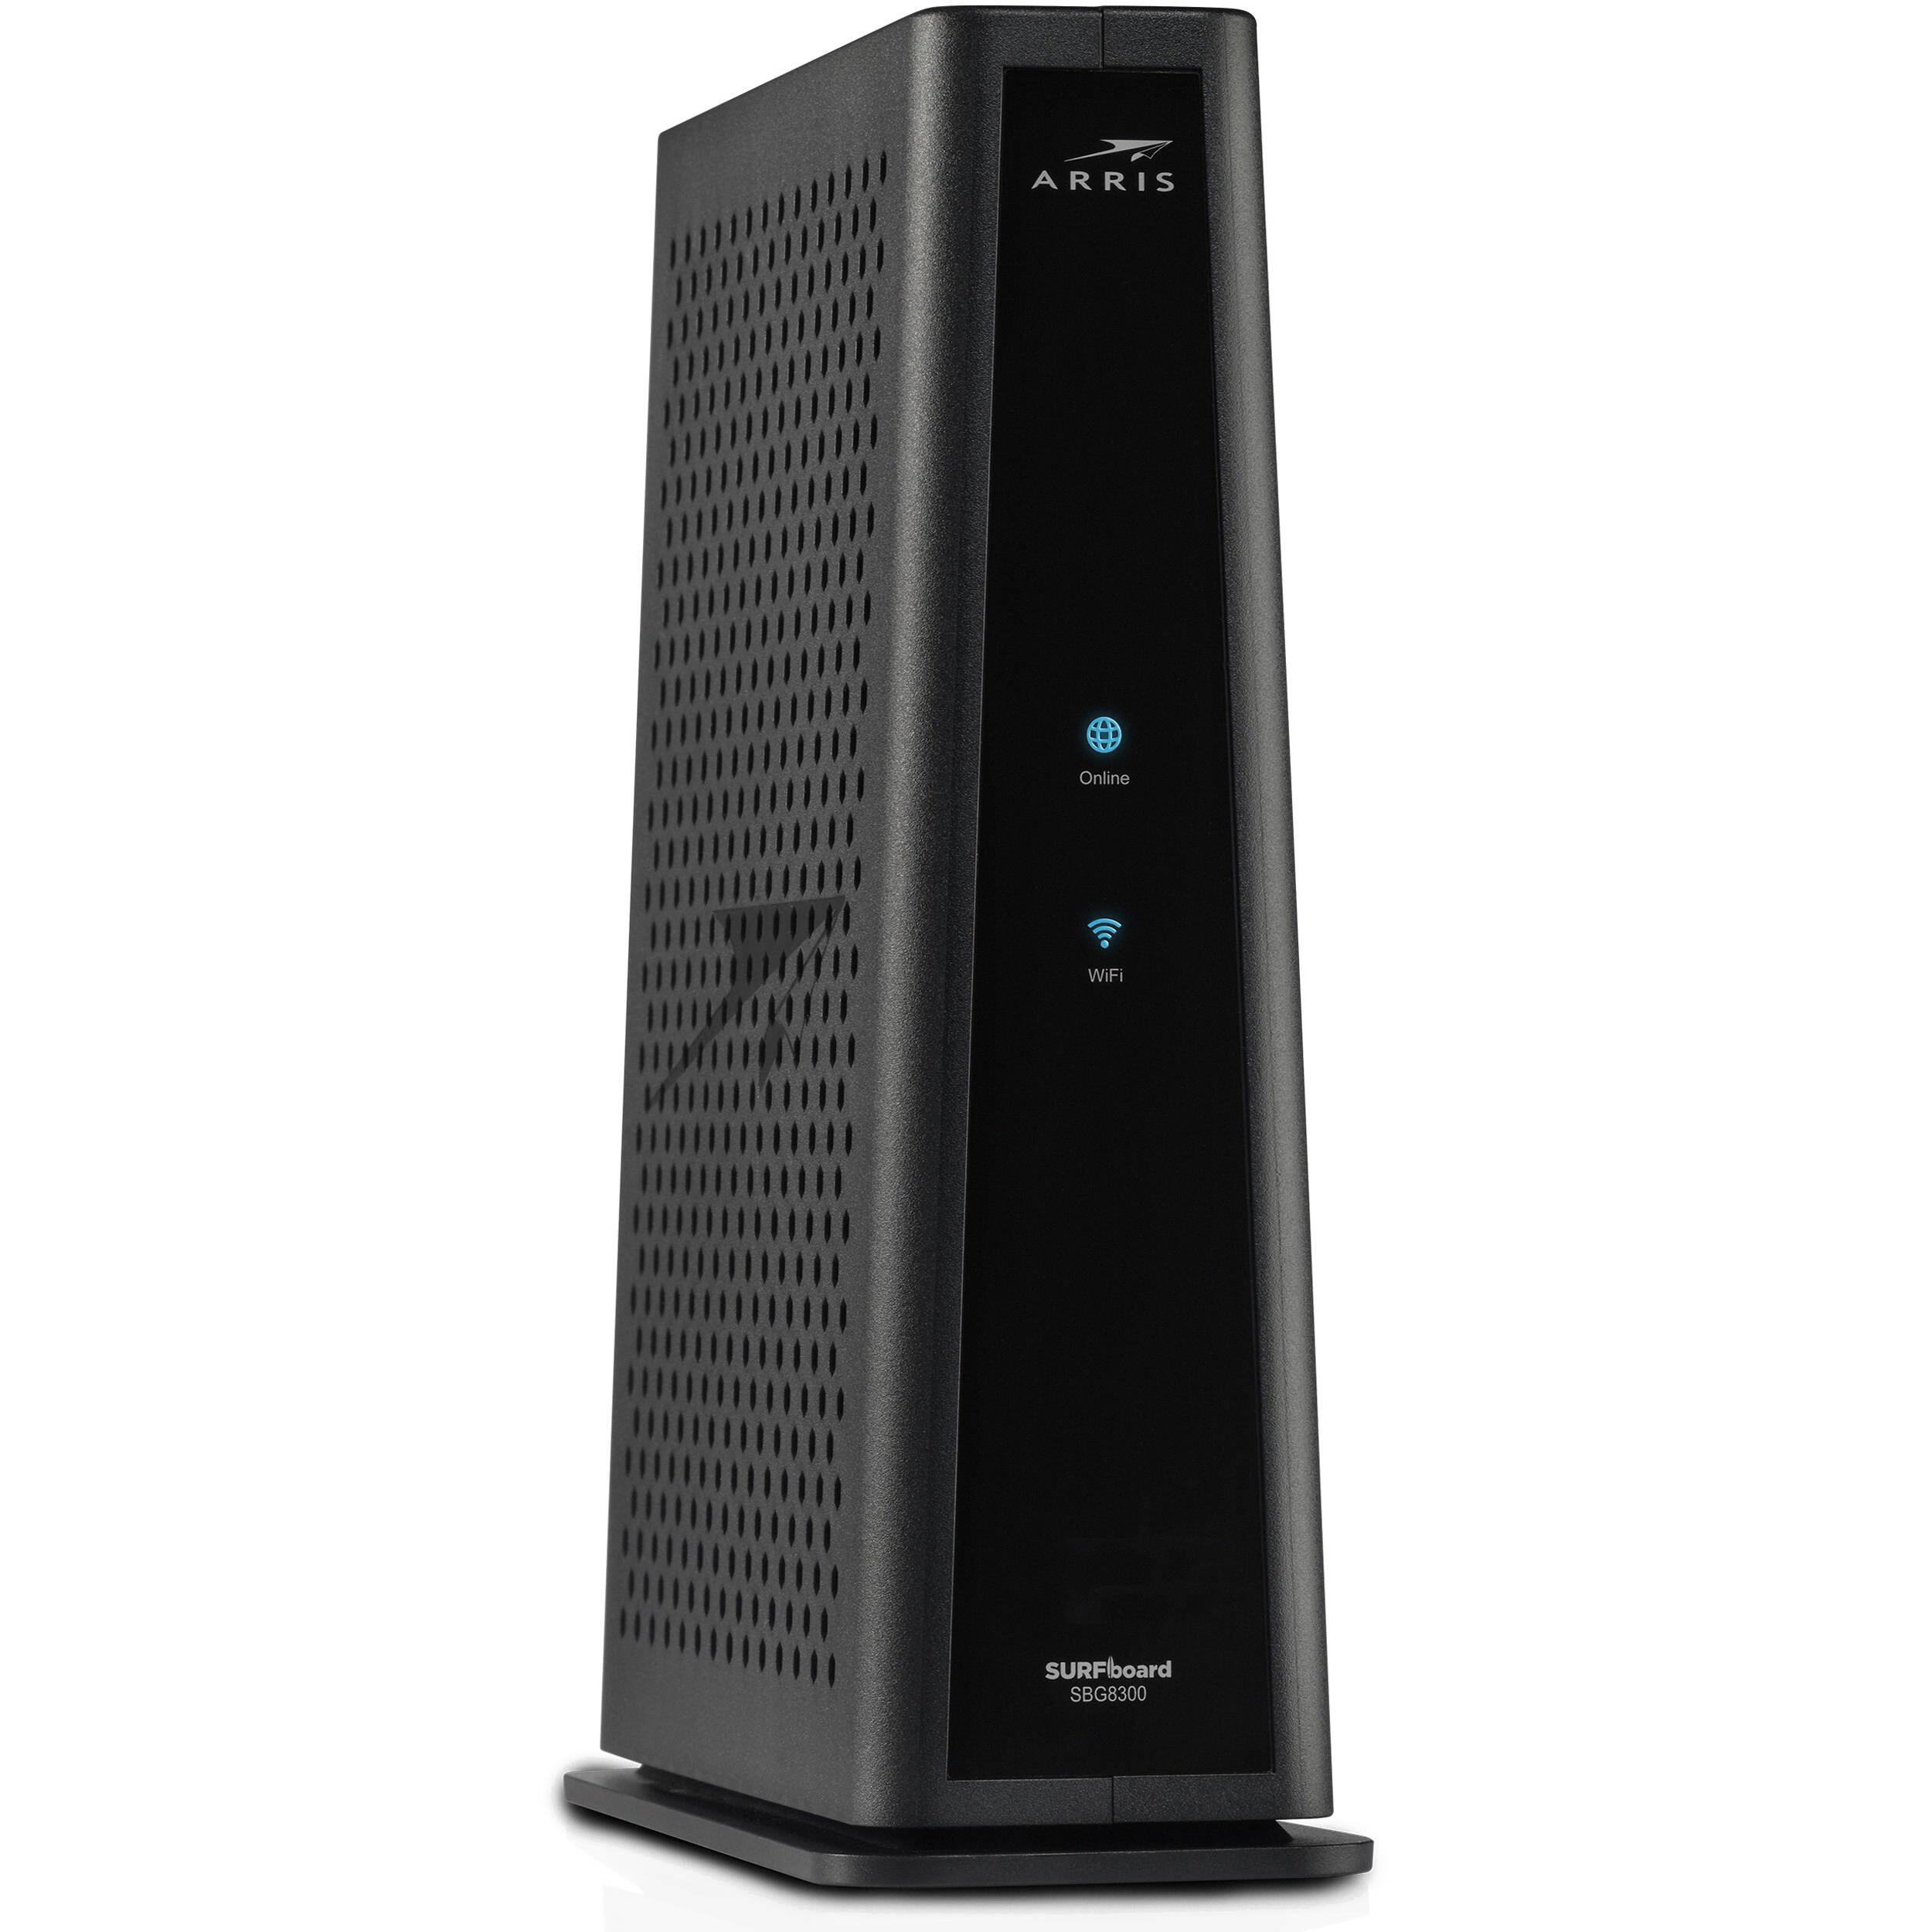 A Comprehensive Review of SBG8300 Cable Modem and Wi-Fi Router 9